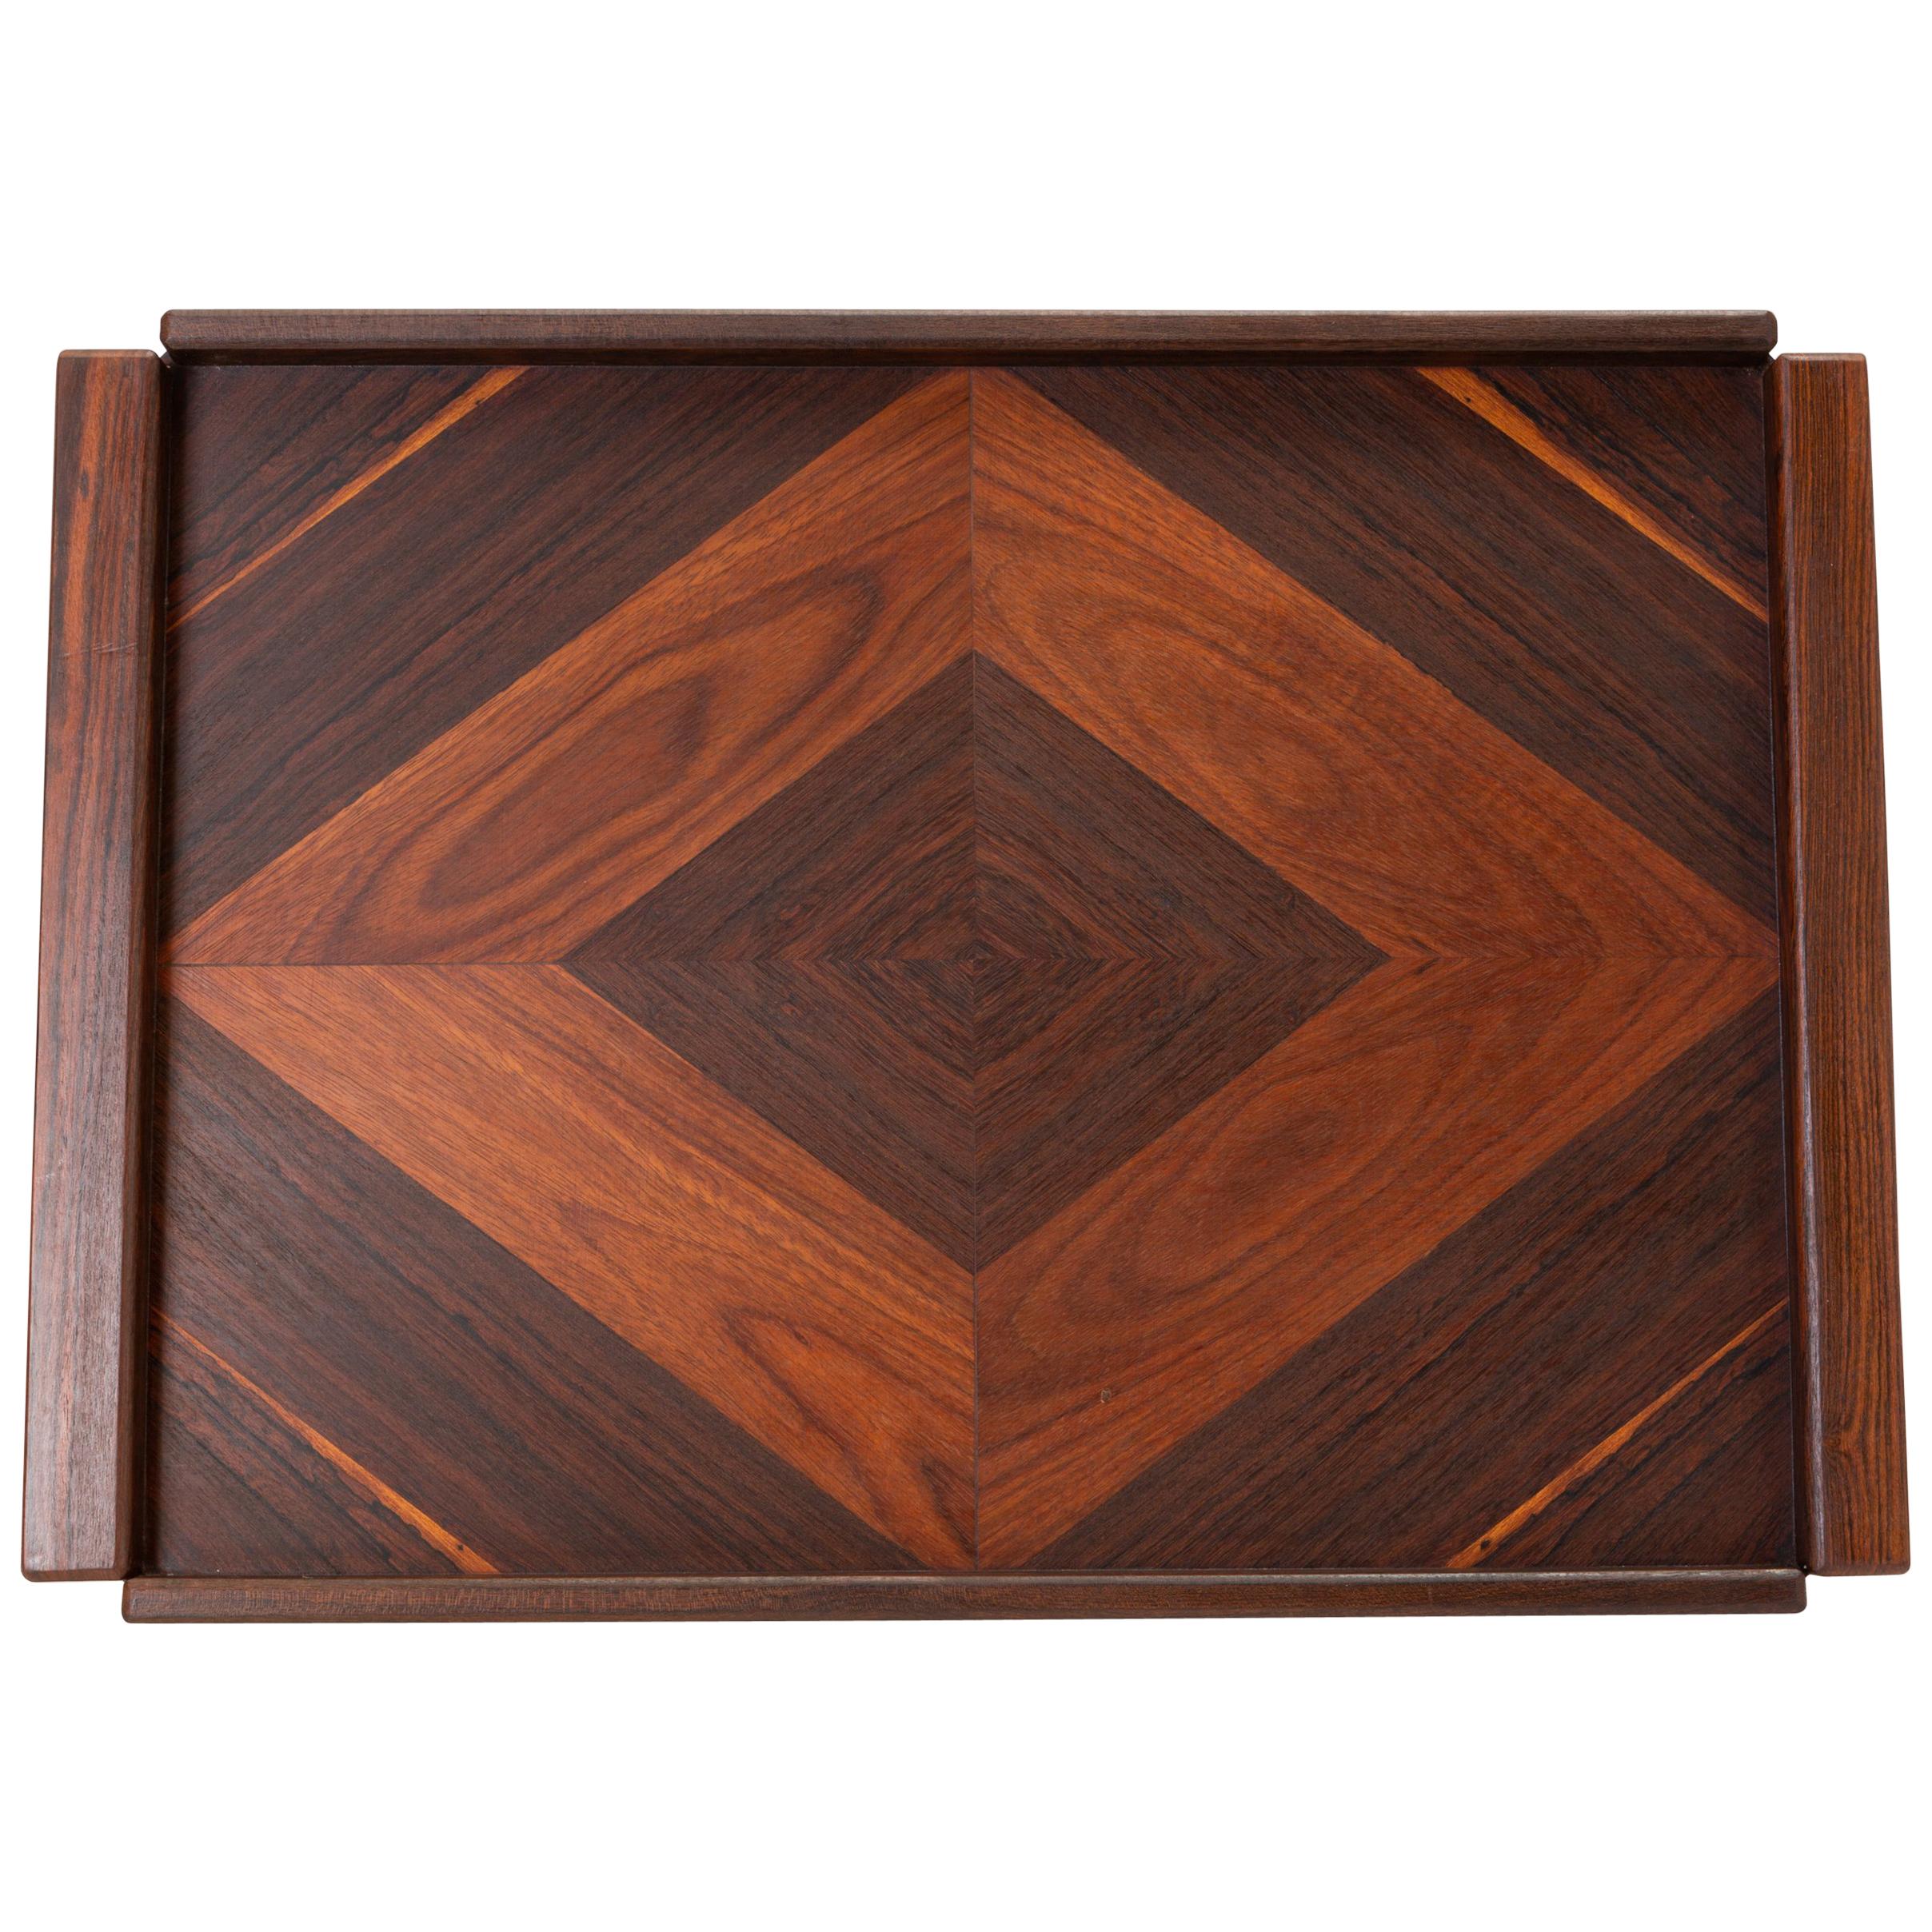 Rosewood Tray with Diamond Motif by Don Shoemaker for Señal